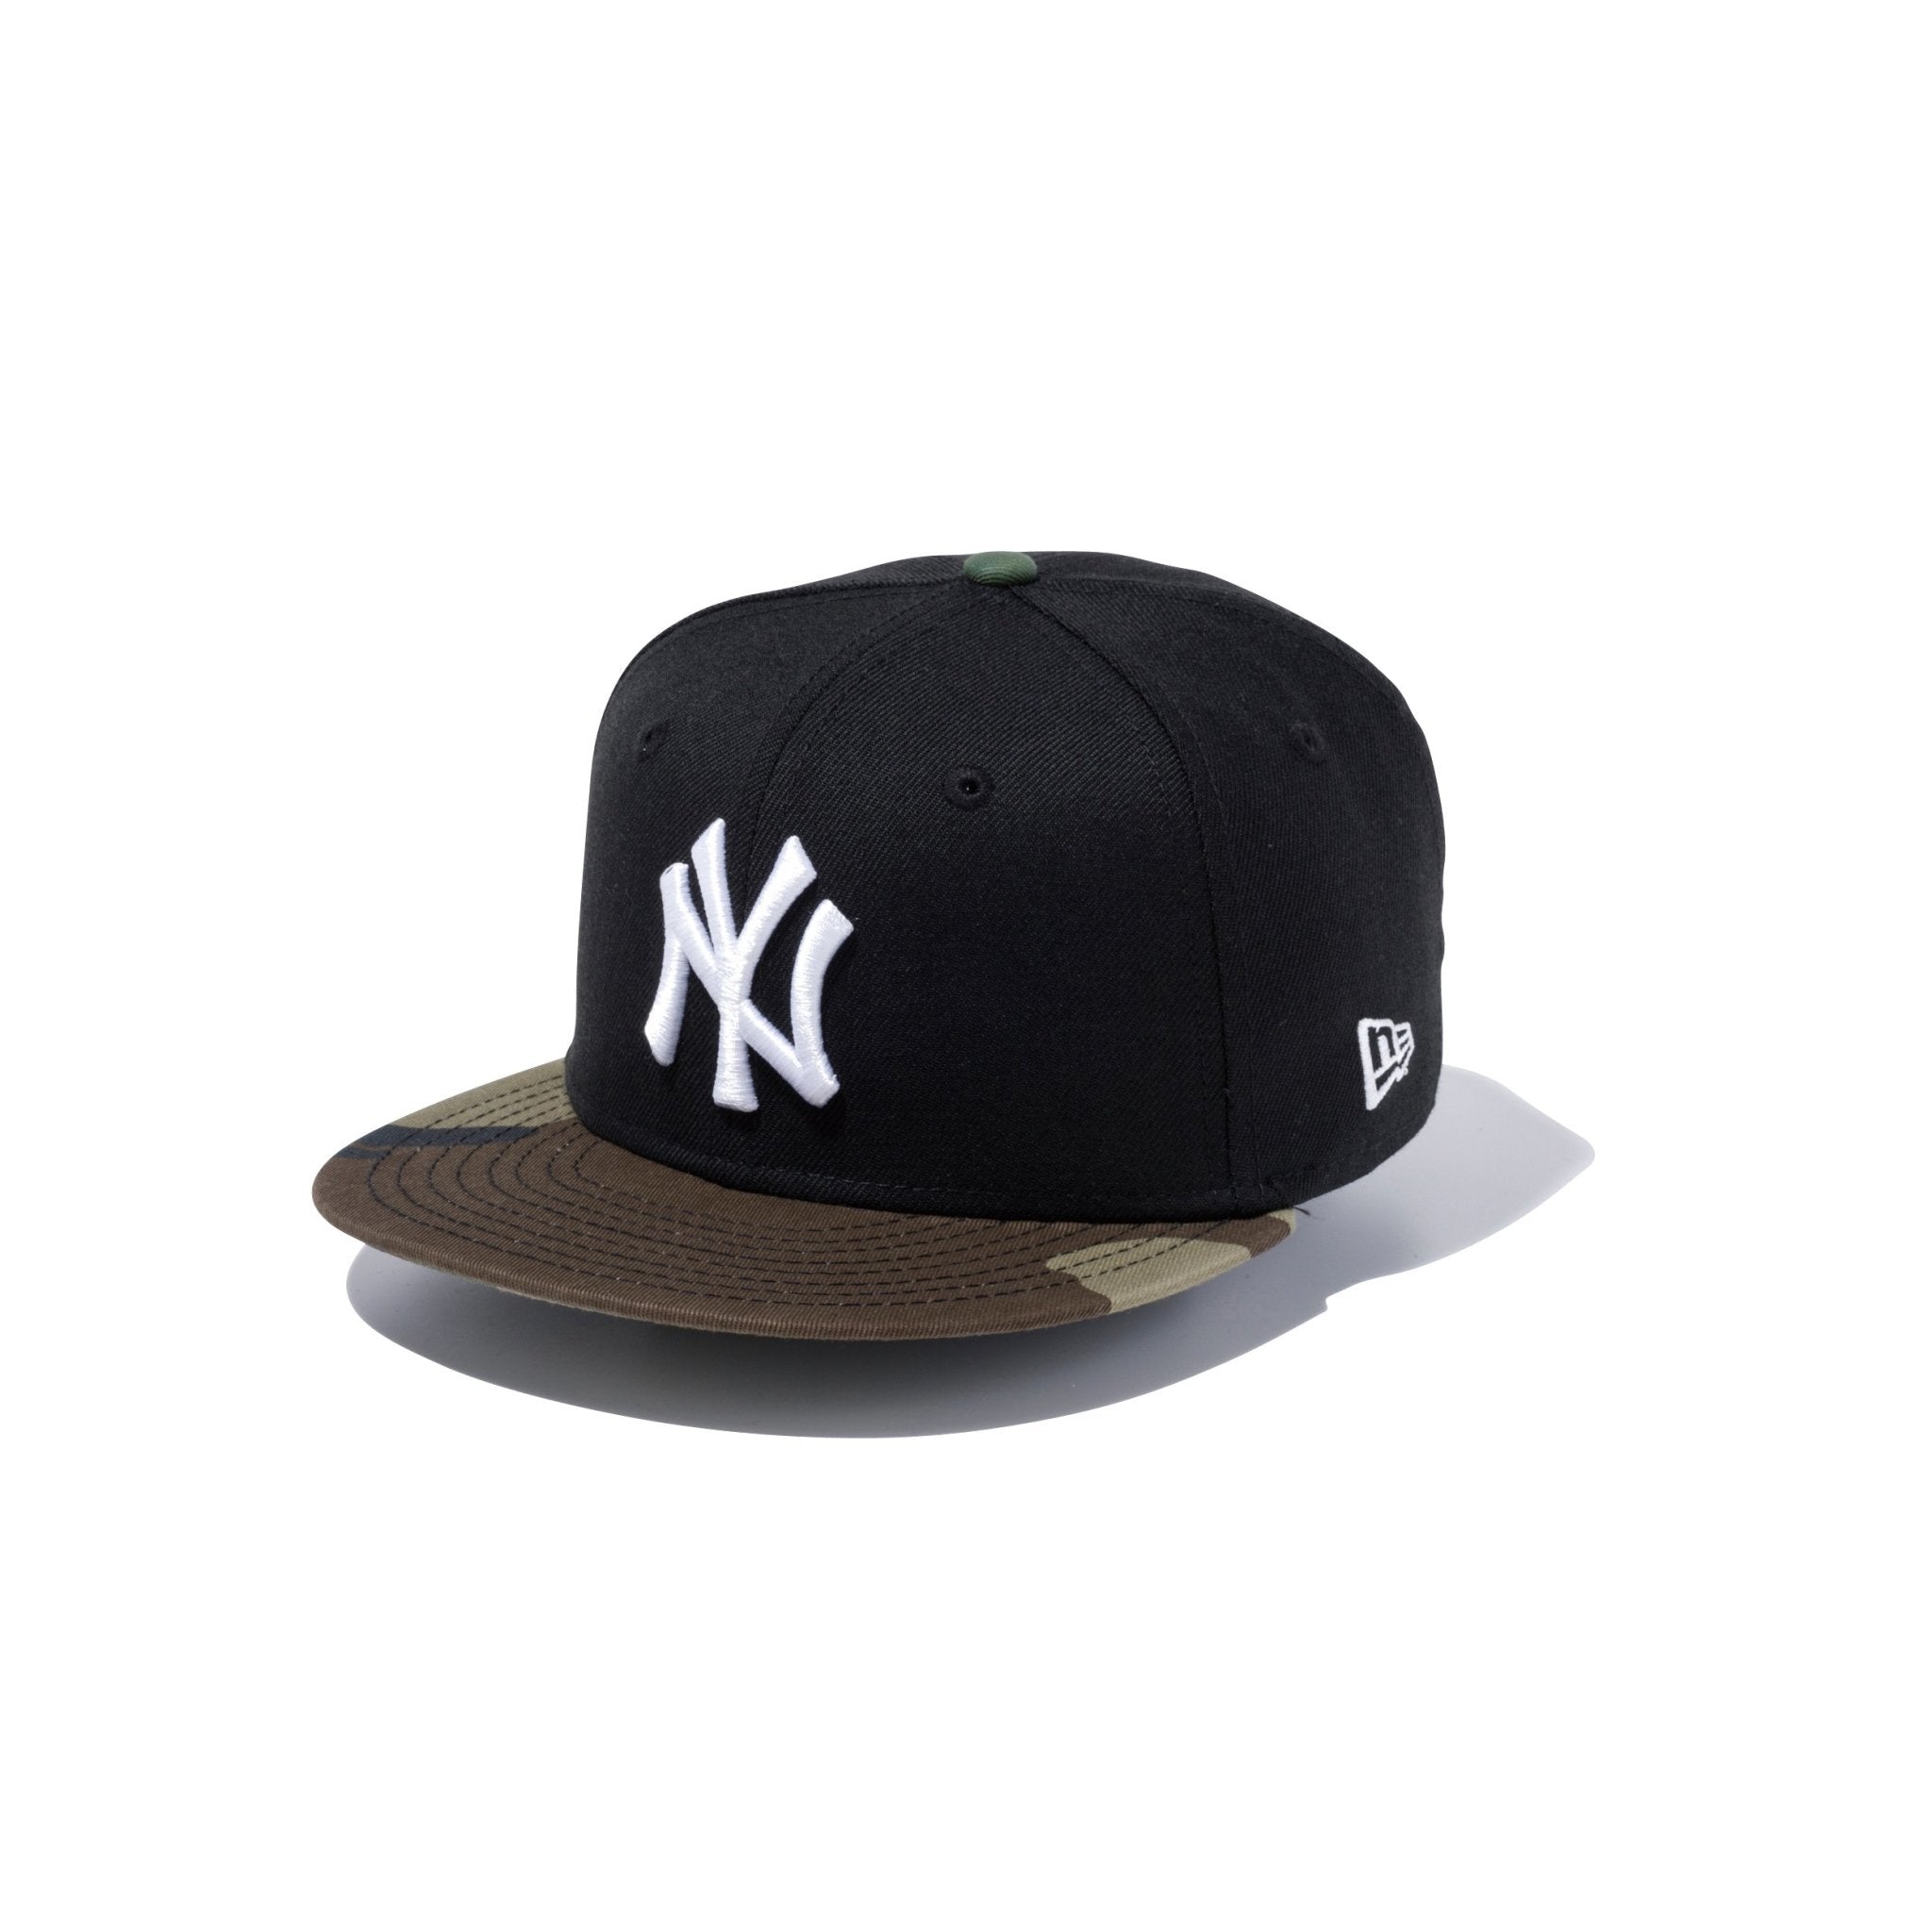 Youth 9FIFTY SHADOW ニューヨーク・ヤンキース ダークグラファイト 